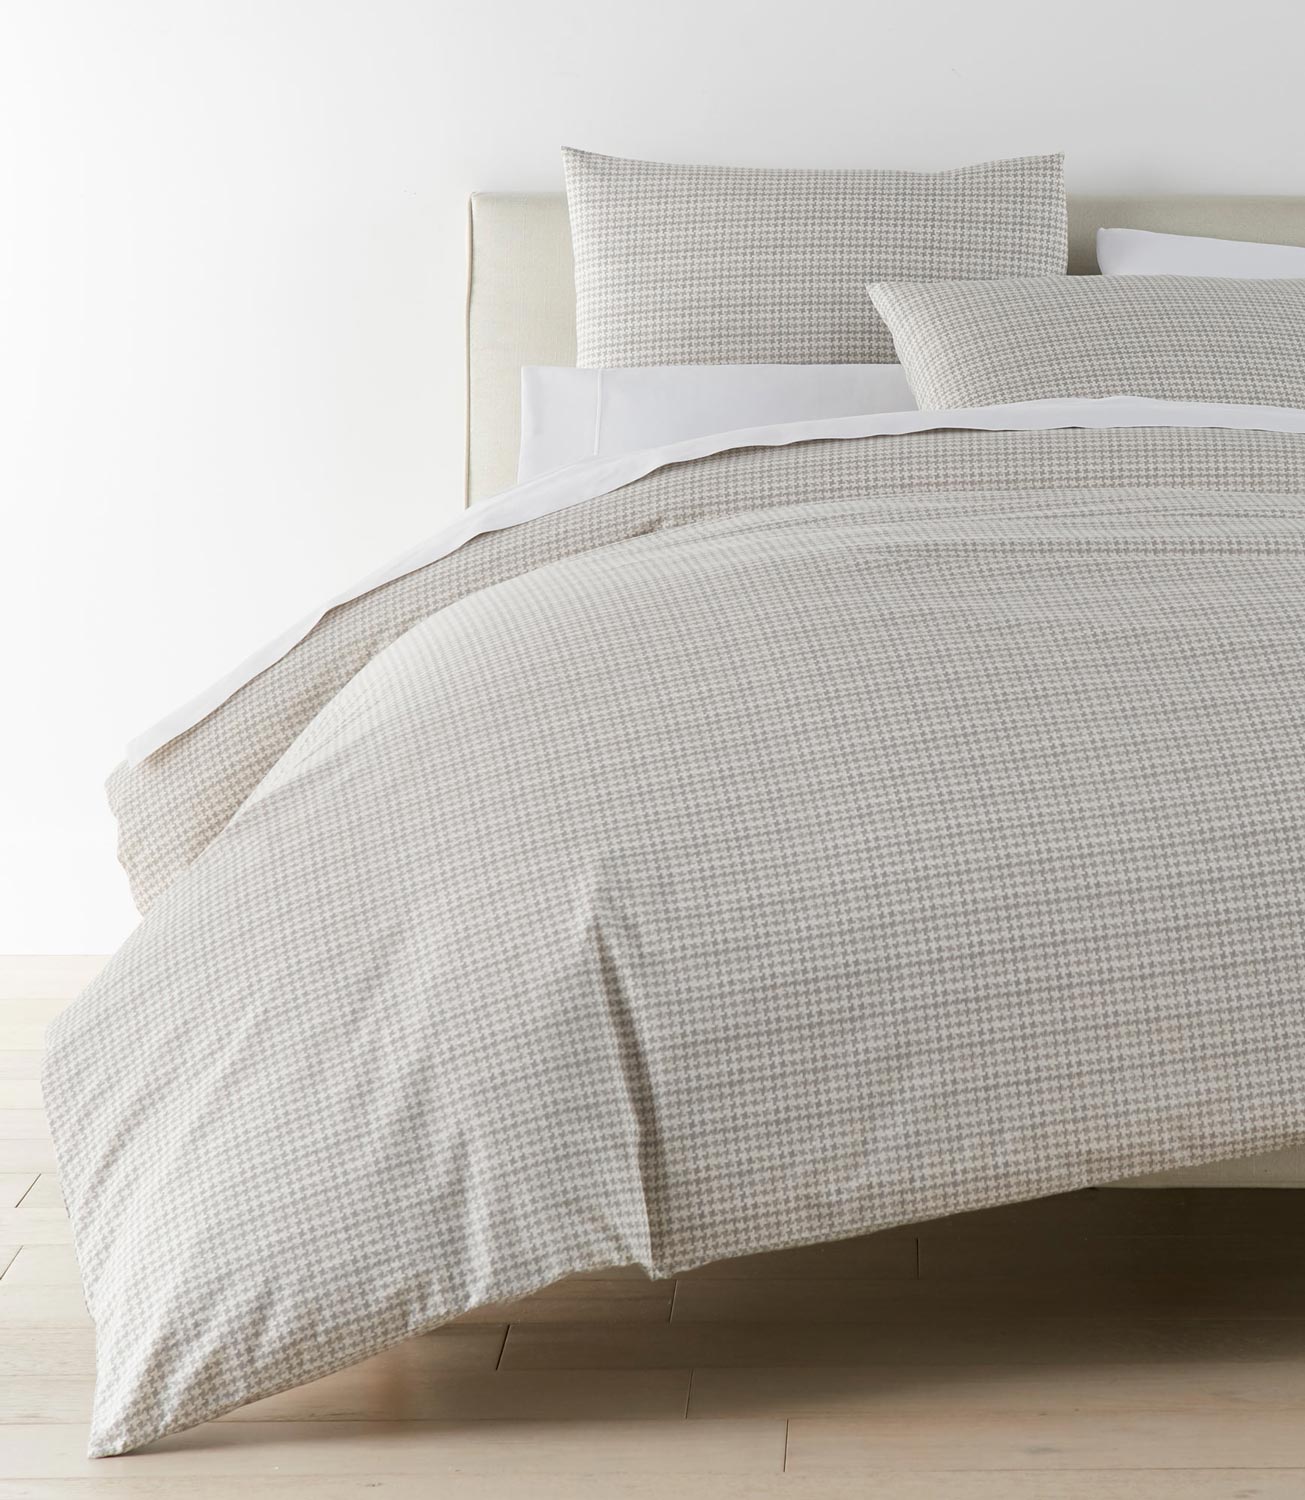 Houndstooth Percale Duvet Cover Greige on bed